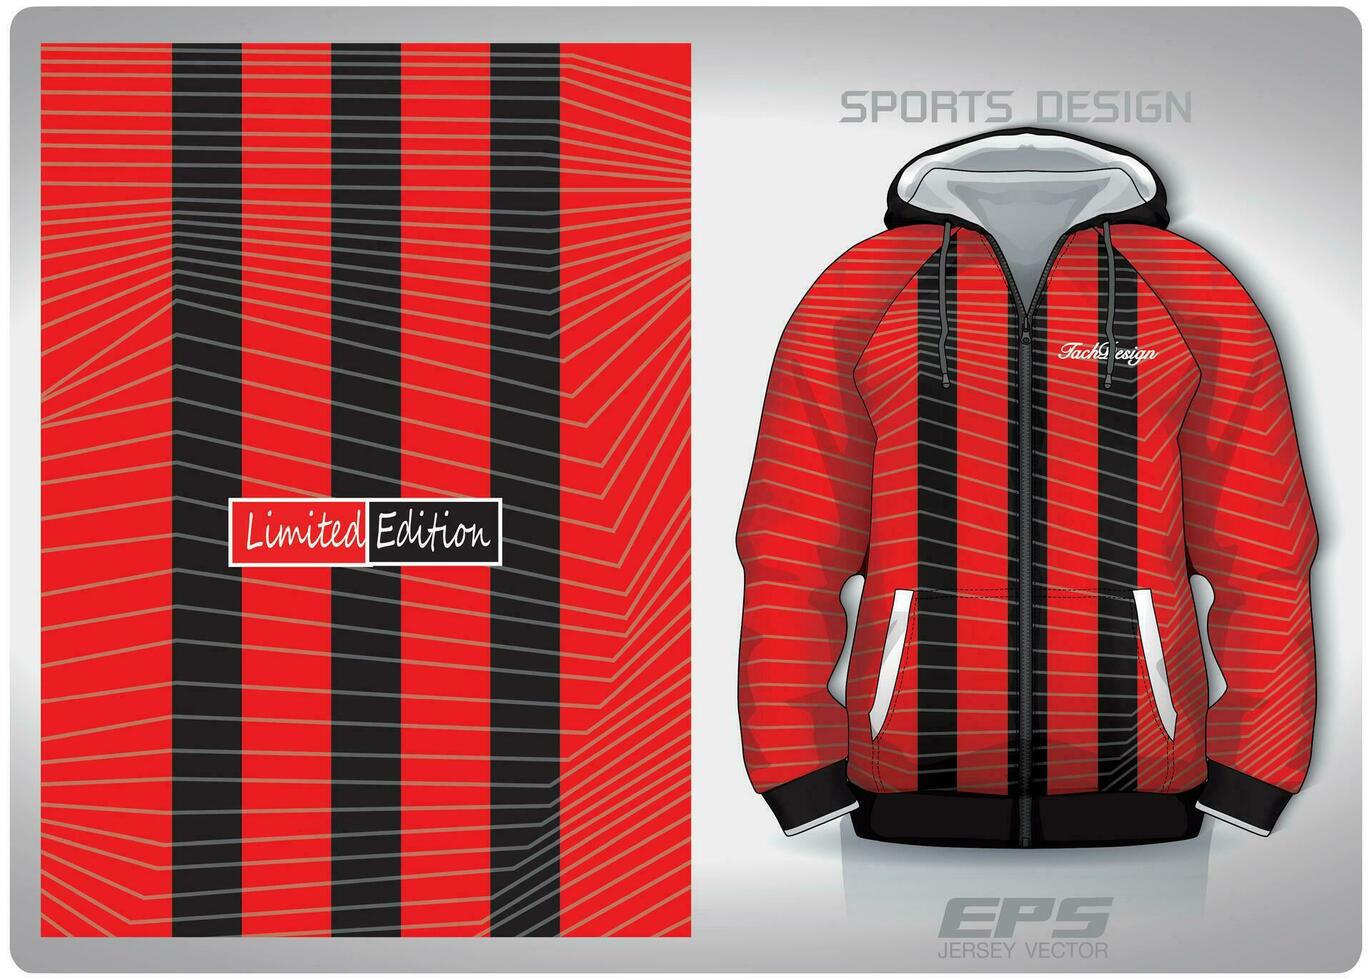 Vector sports shirt background image.Straight stripes and cross stripes in black and red pattern design, illustration, textile background for sports long sleeve hoodie, jersey hoodie